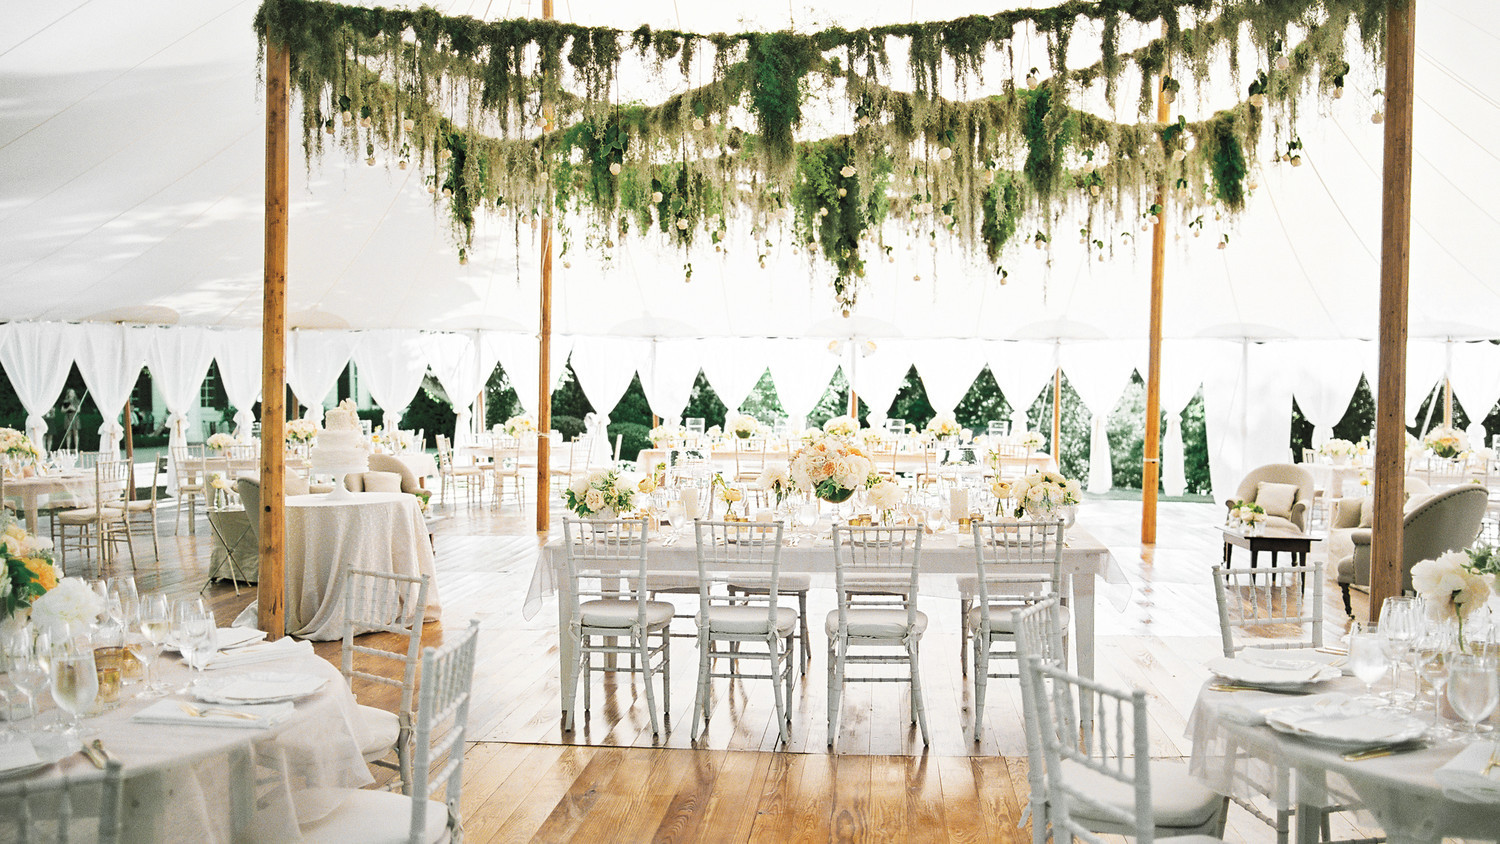 How To Decorate For A Wedding Reception
 28 Tent Decorating Ideas That Will Upgrade Your Wedding